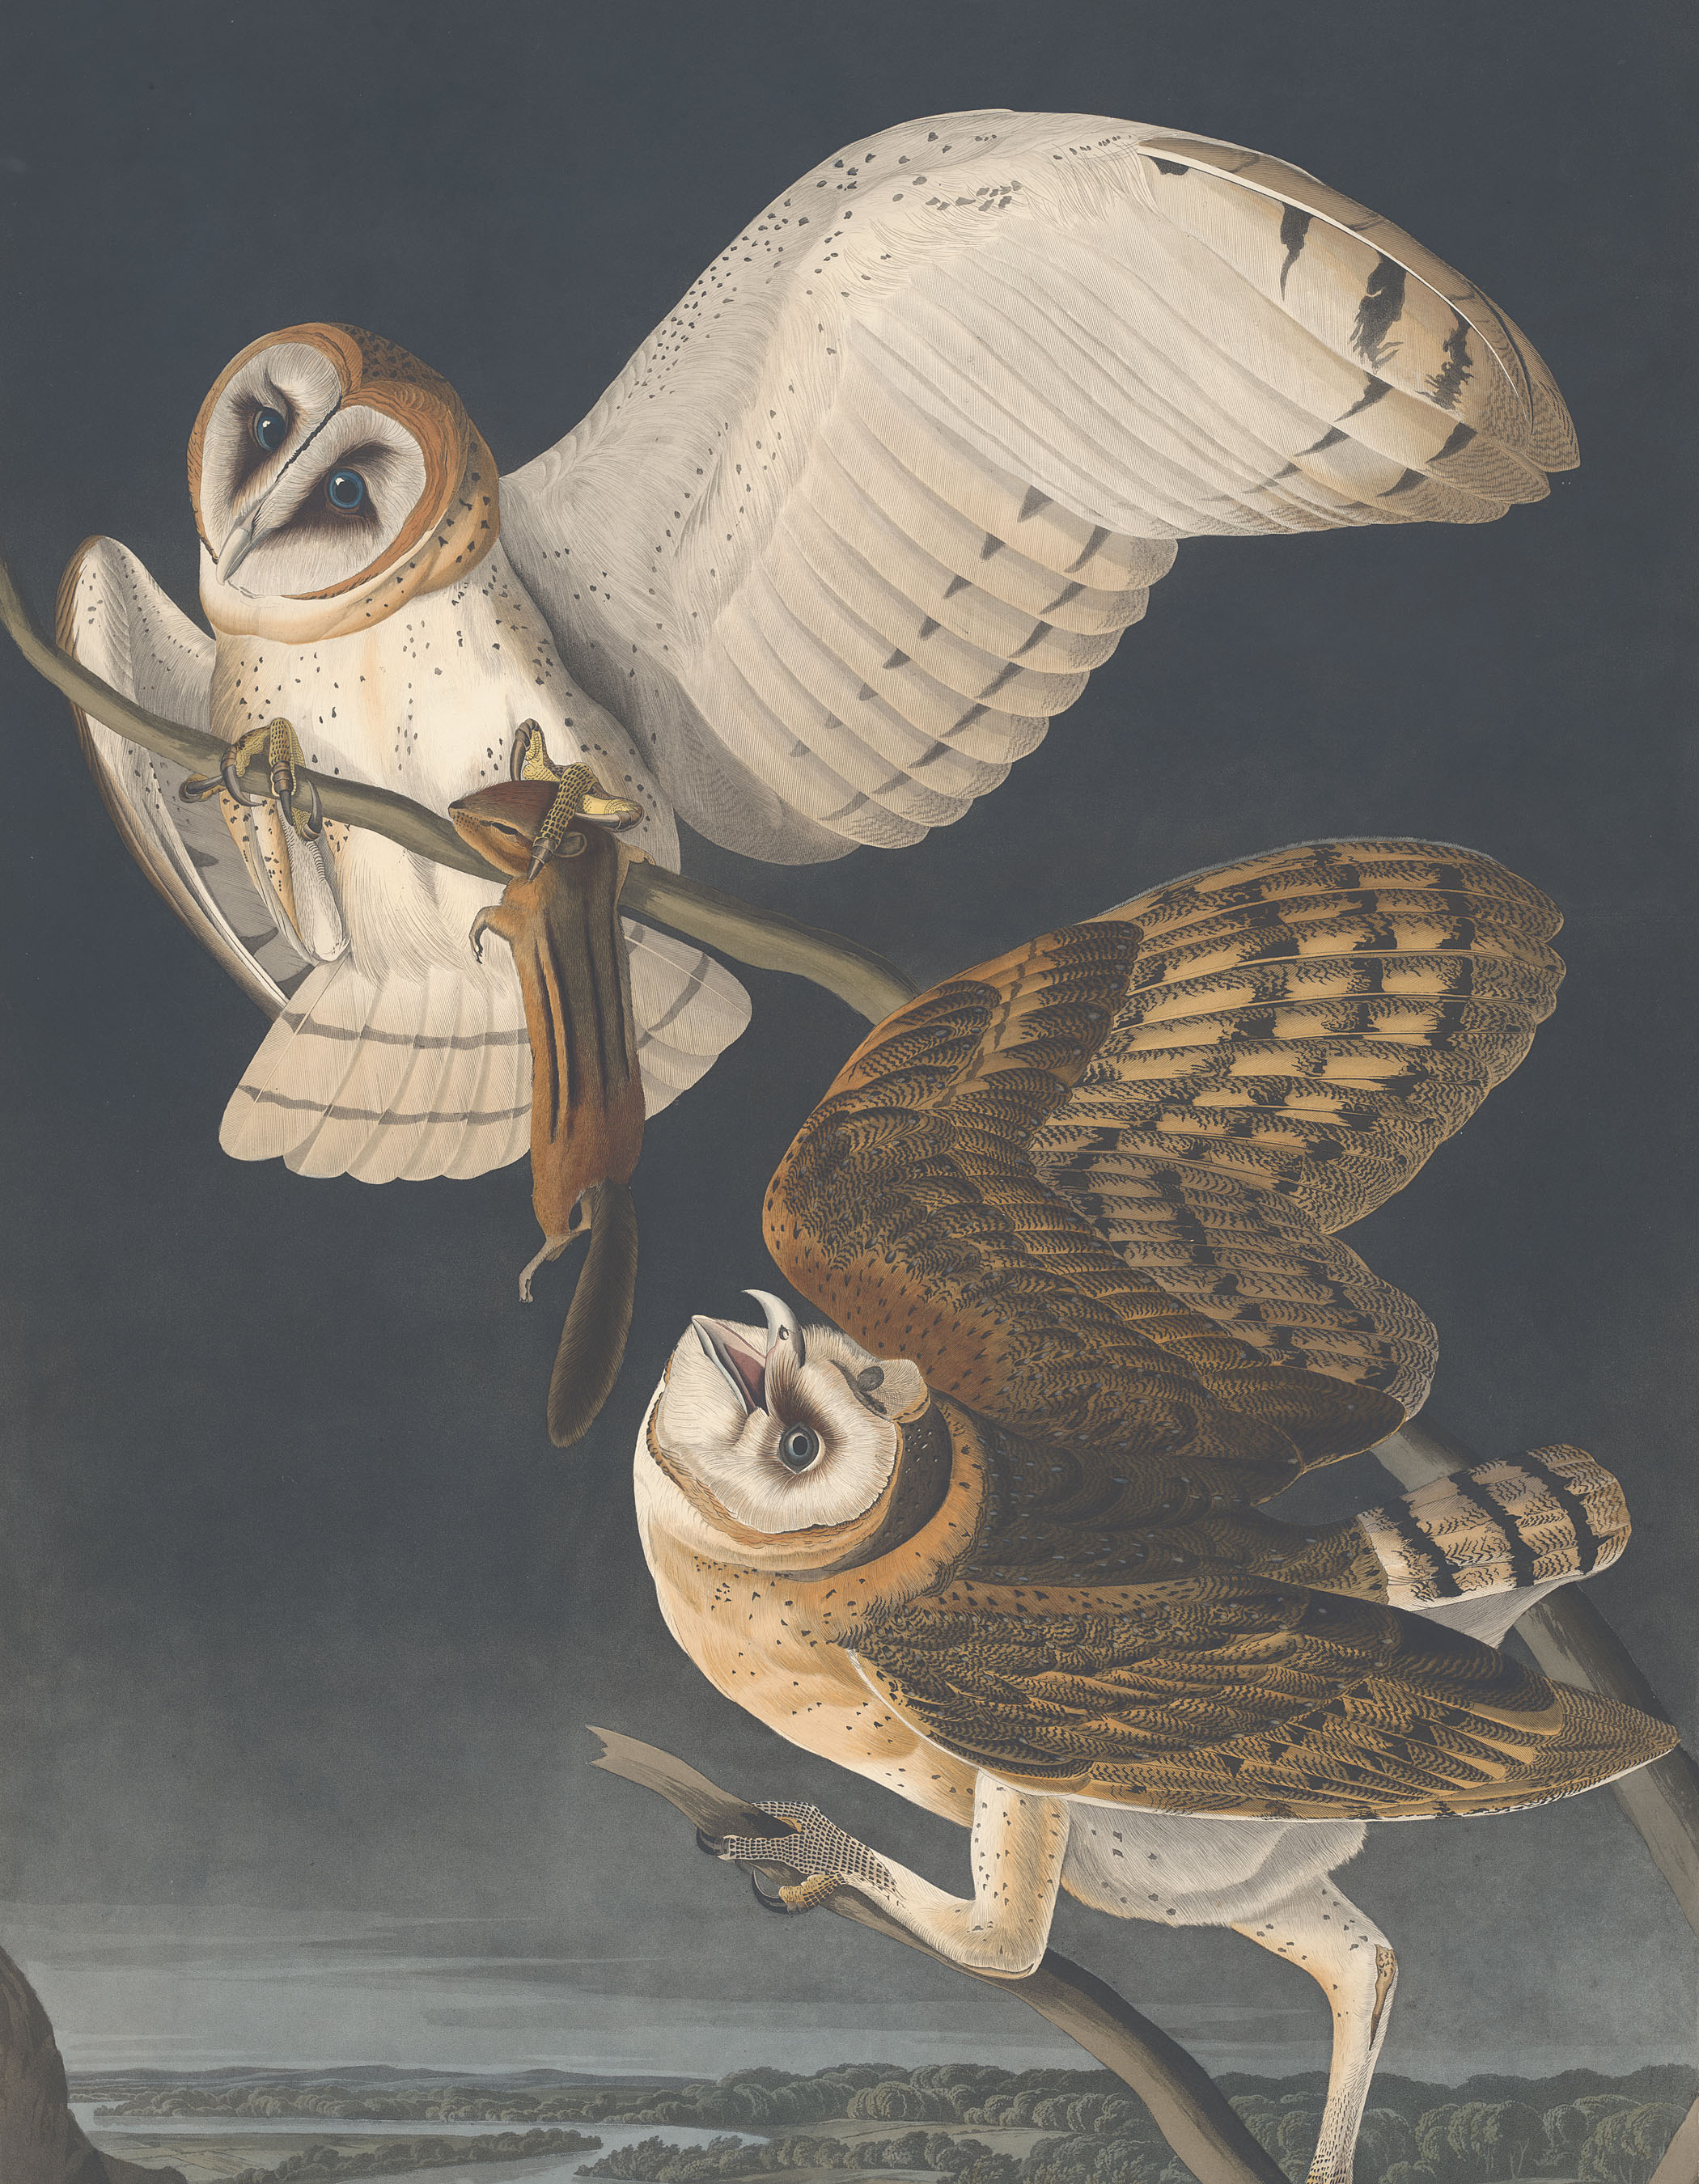 An image from Audobon’s The Birds of America (1827-38)